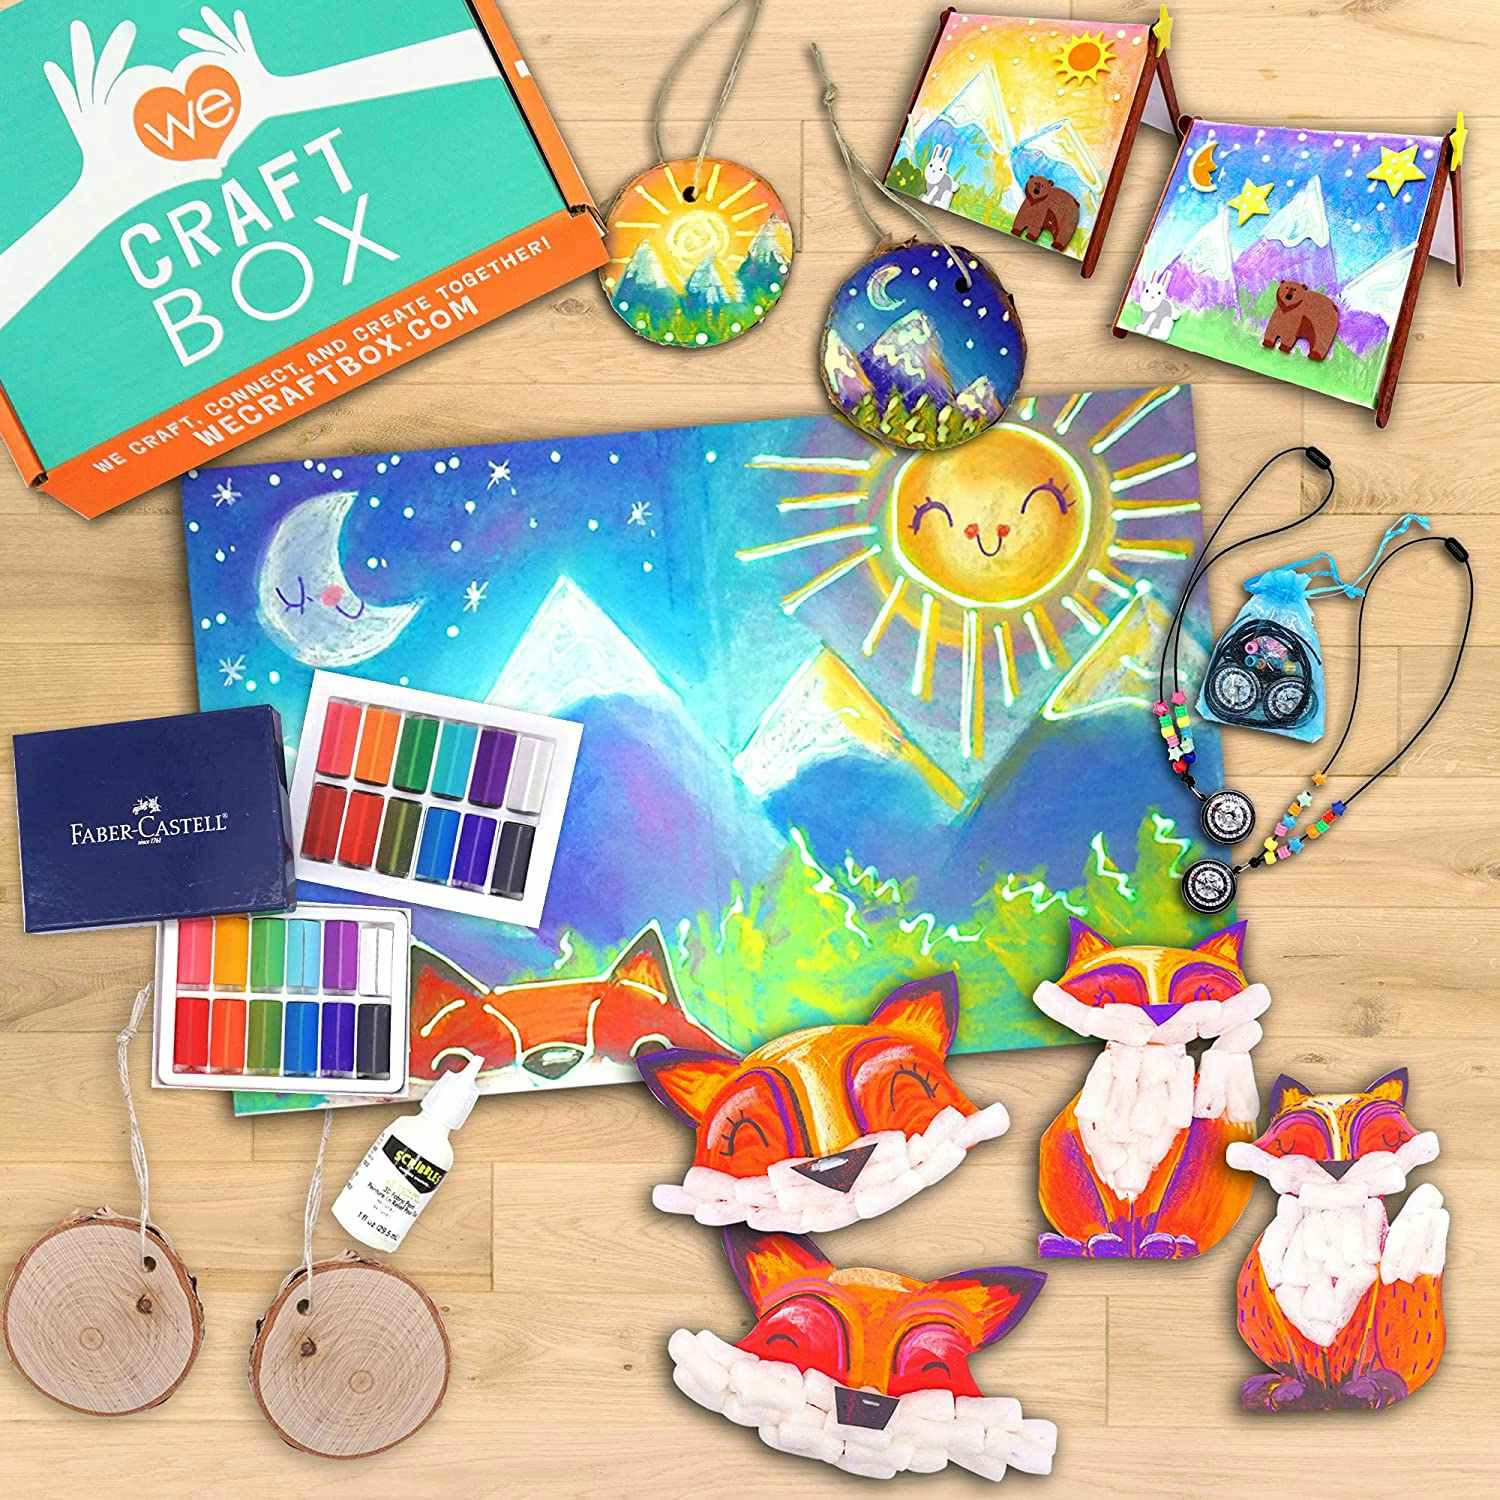  We Craft Box Monthly Subscription Box for Kids Ages 4